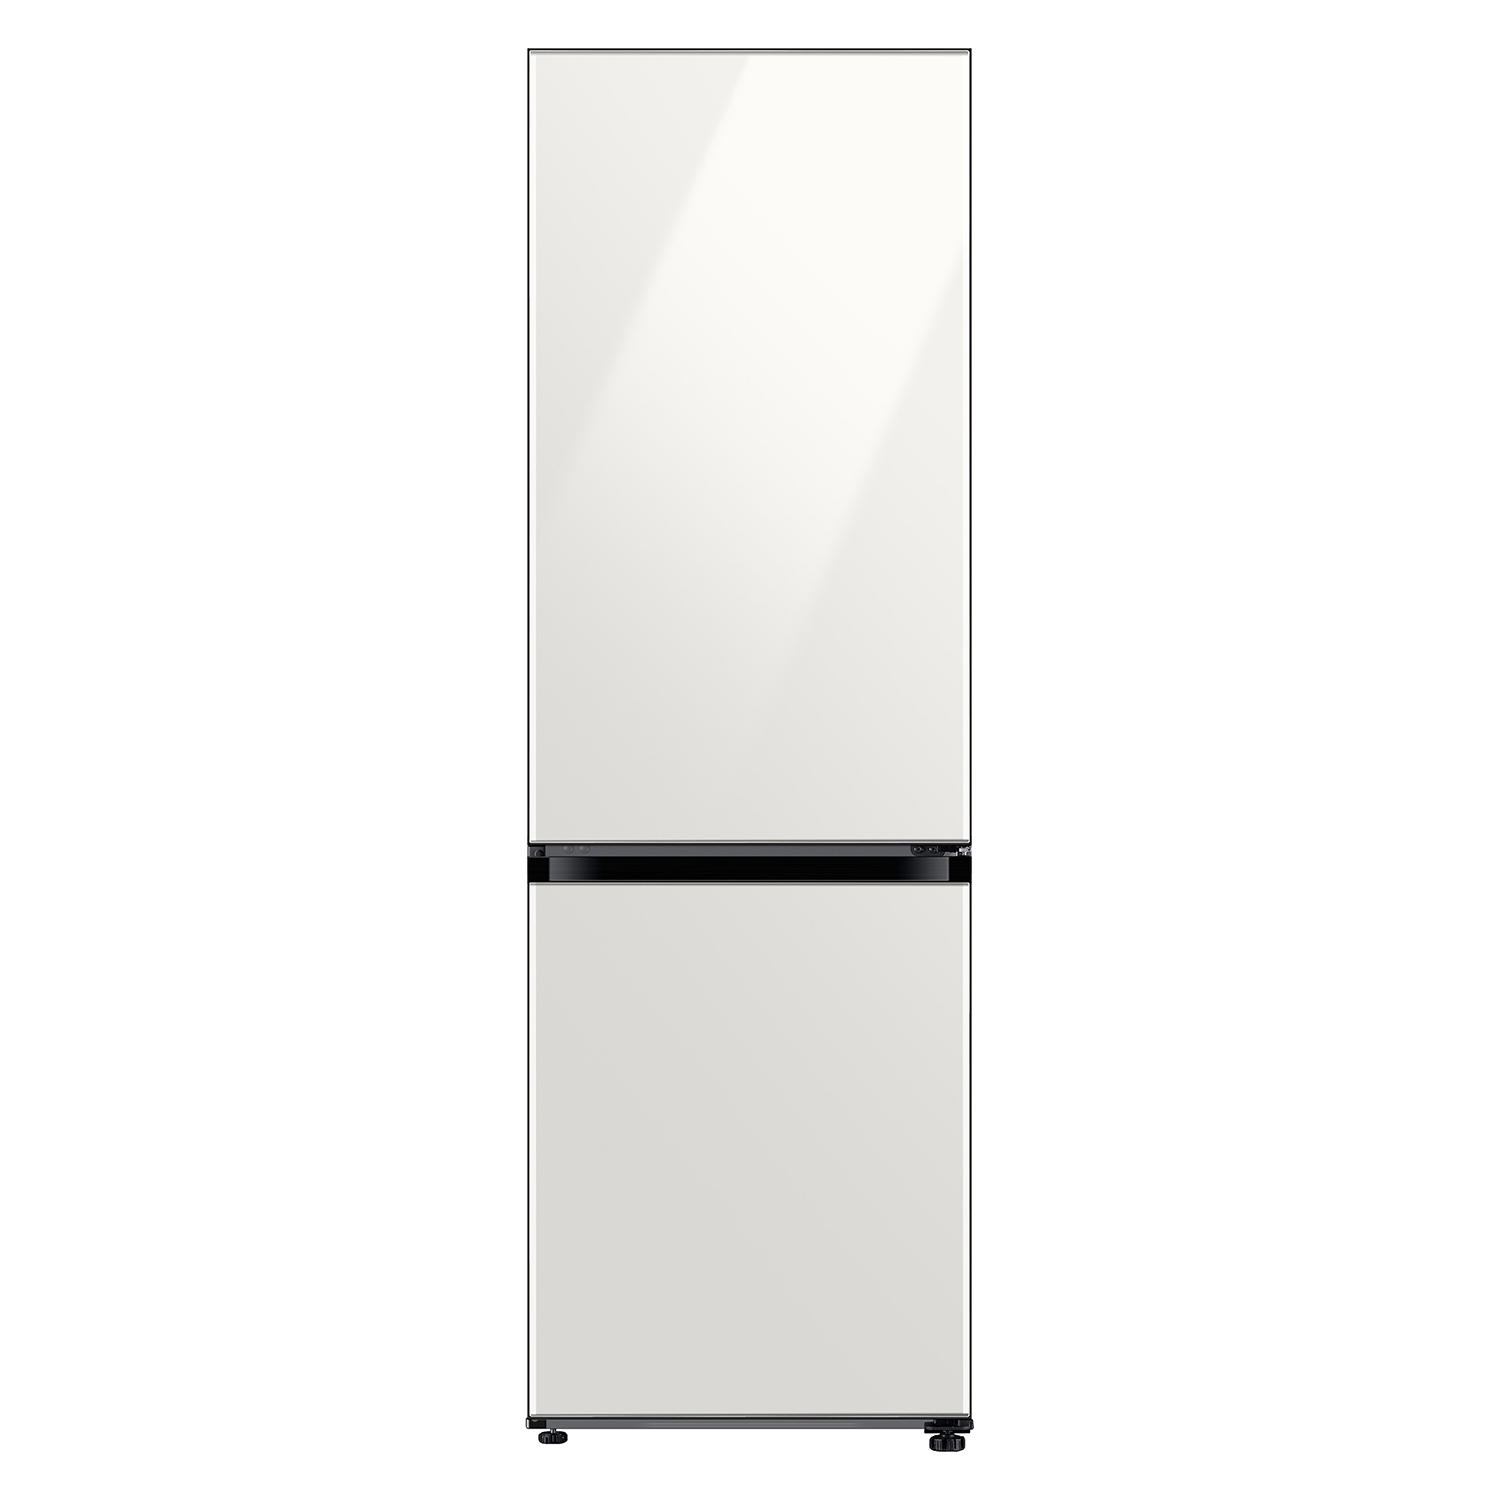 SAMSUNG 12.0 cu. ft. BESPOKE Bottom Freezer Refrigerator with Customizable Colors and Flexible Design in Grey Glass